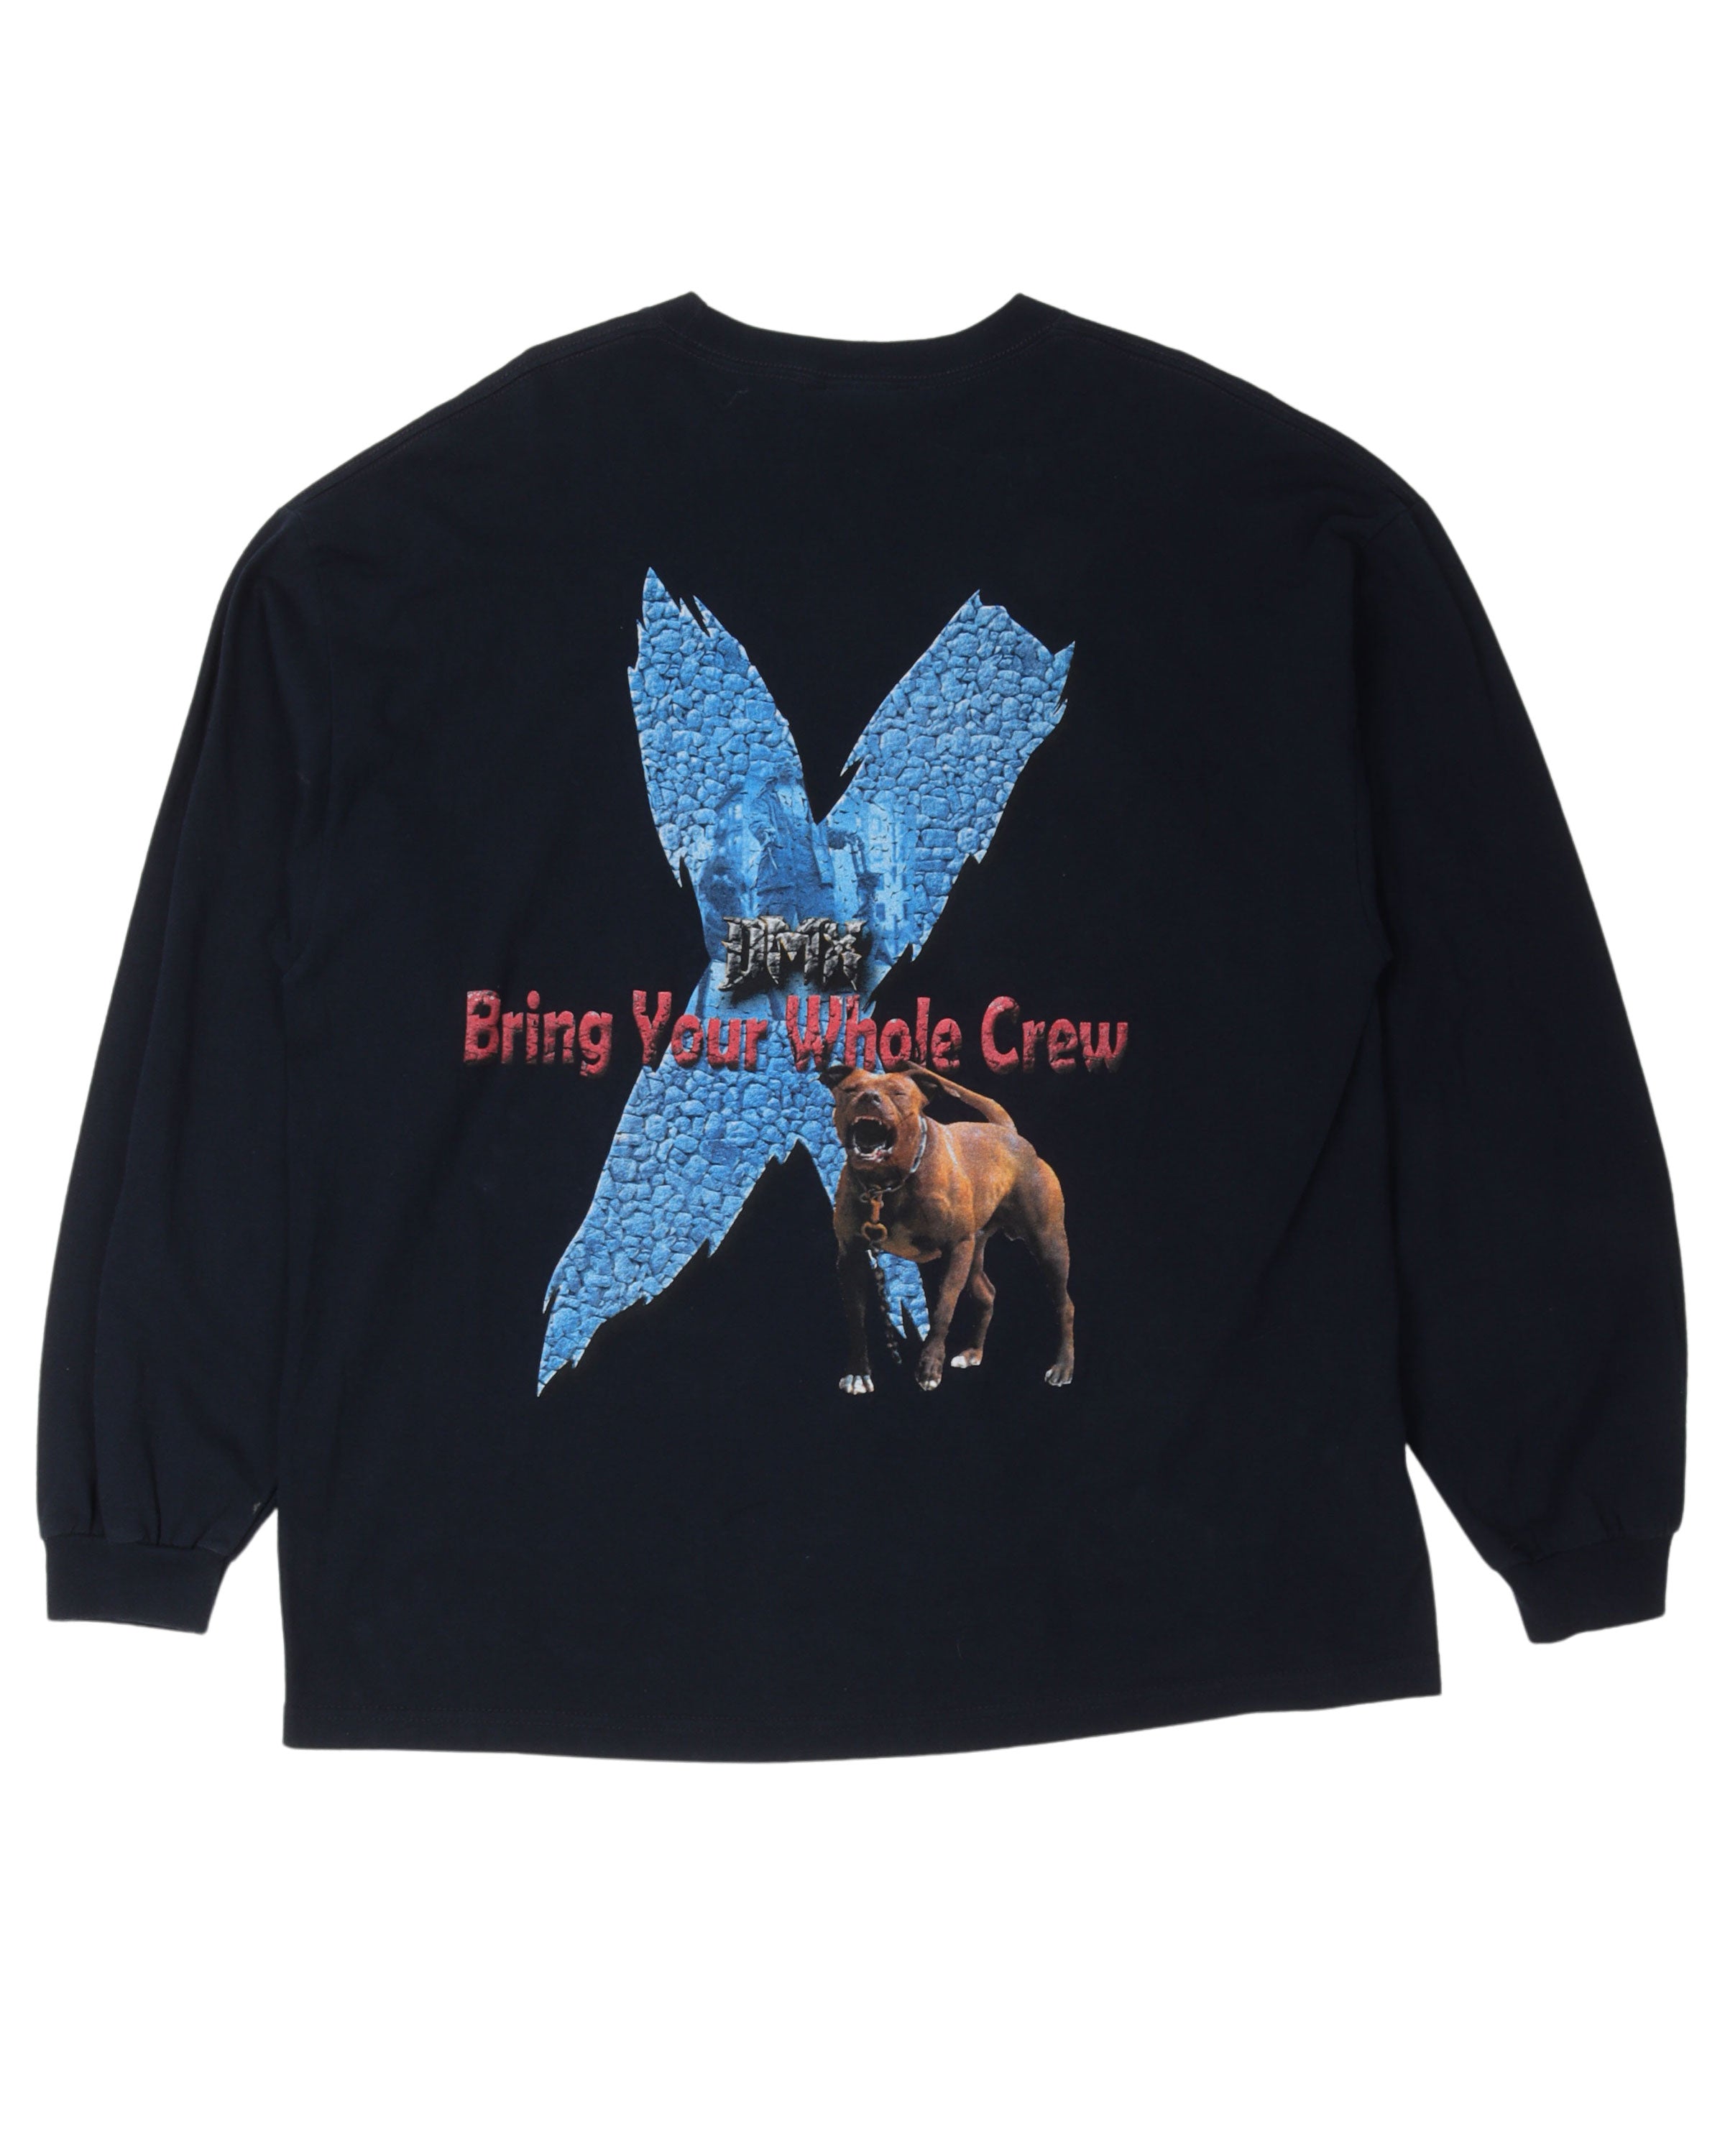 DMX "Bring Your Whole Crew" Long Sleeve T-Shirt